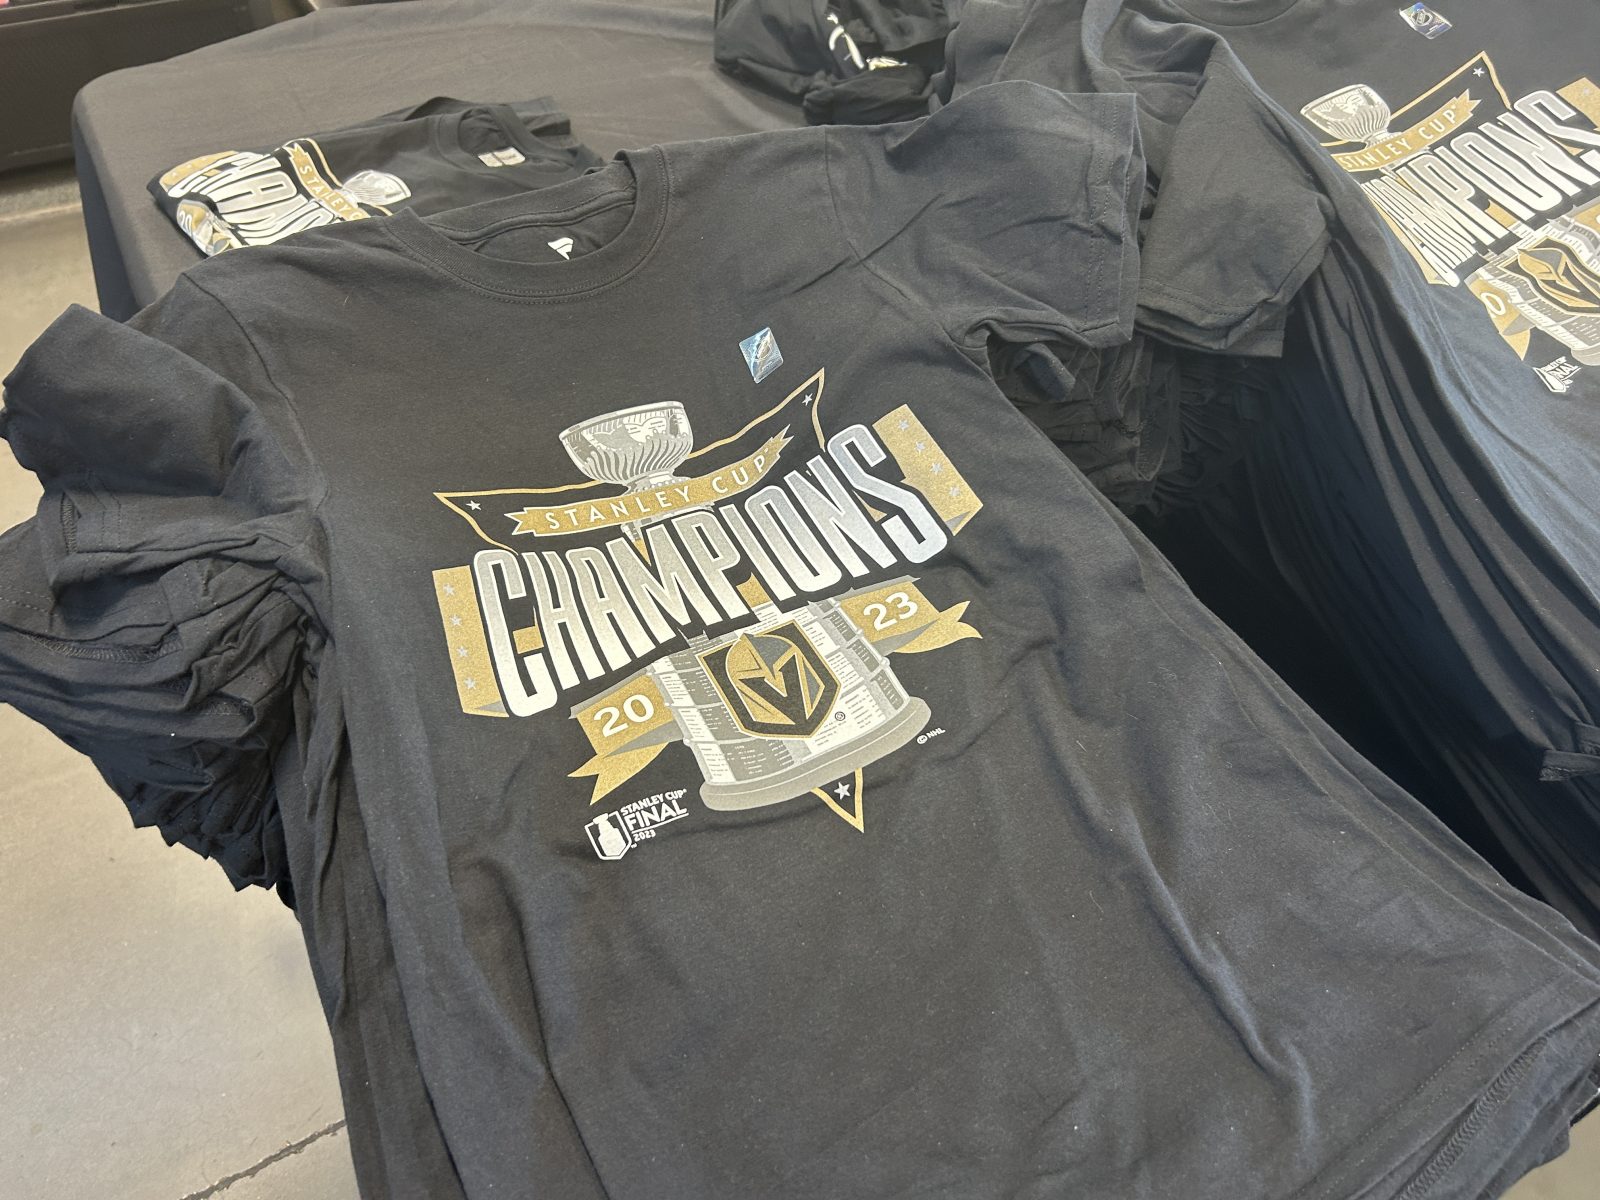 Where can you buy Golden Knights Stanley Cup champions merch